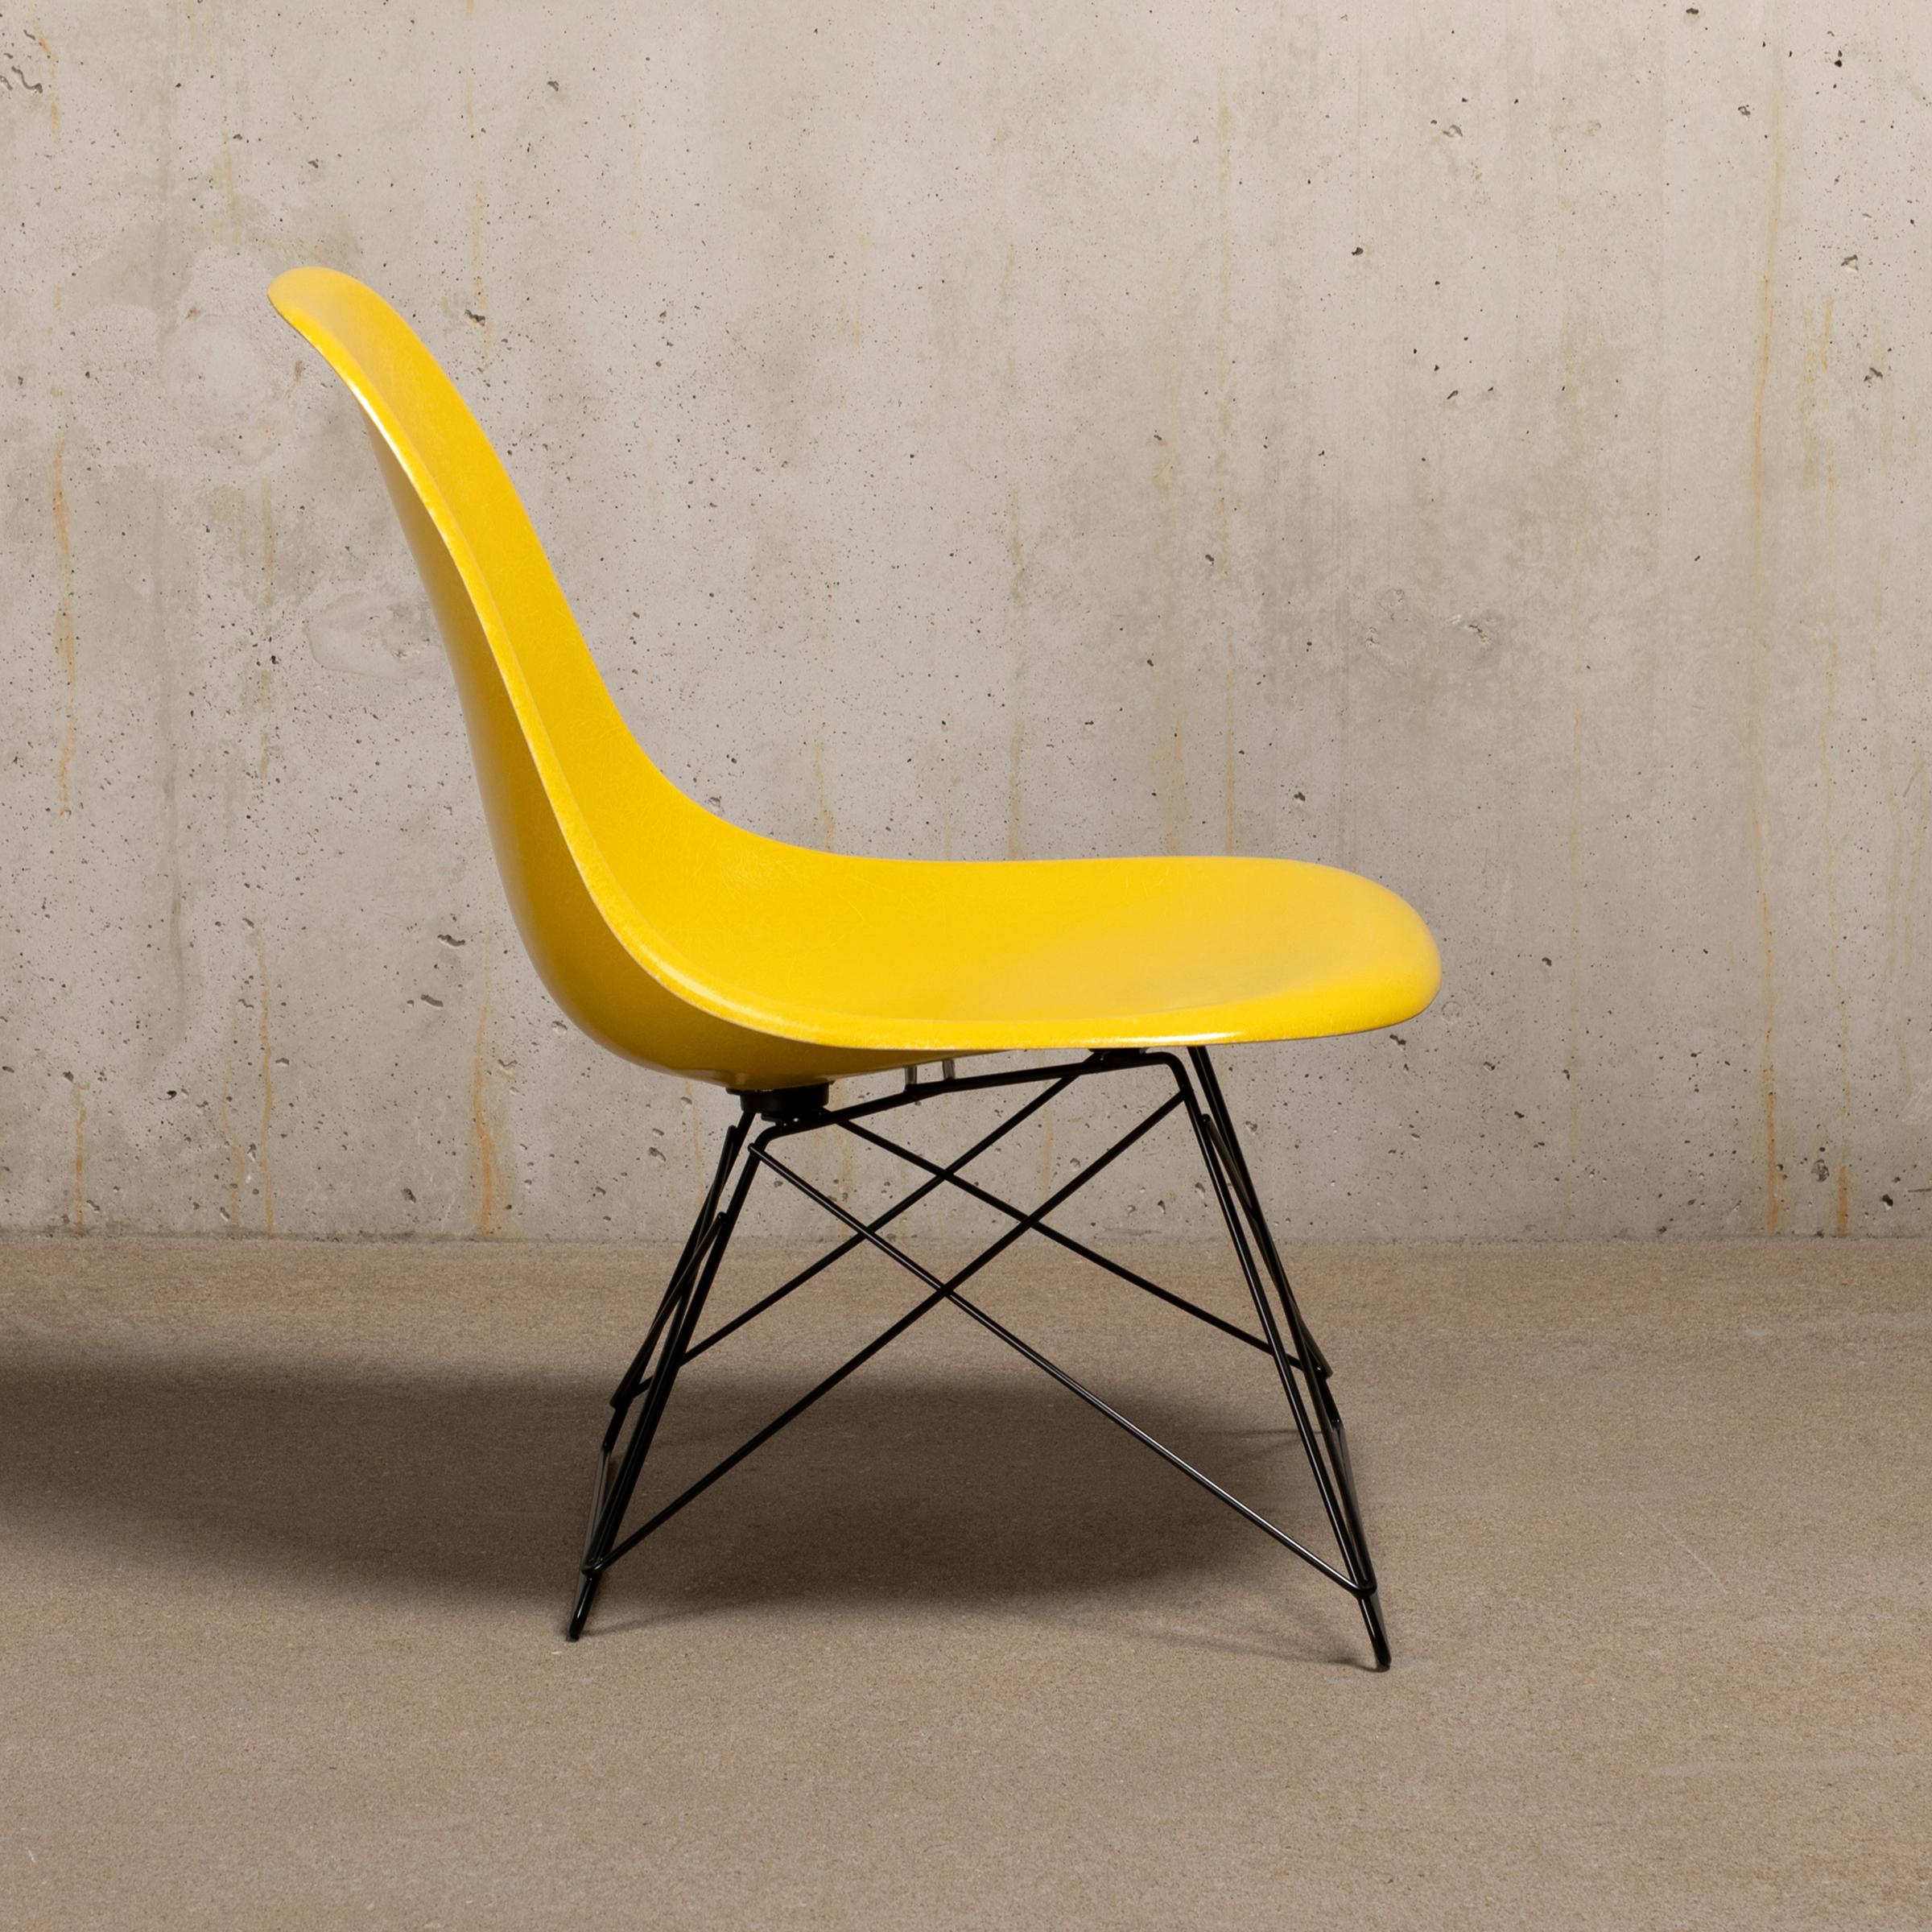 American Charles & Ray Eames LSR Lounge Chair in Bright Yellow for Herman Miller